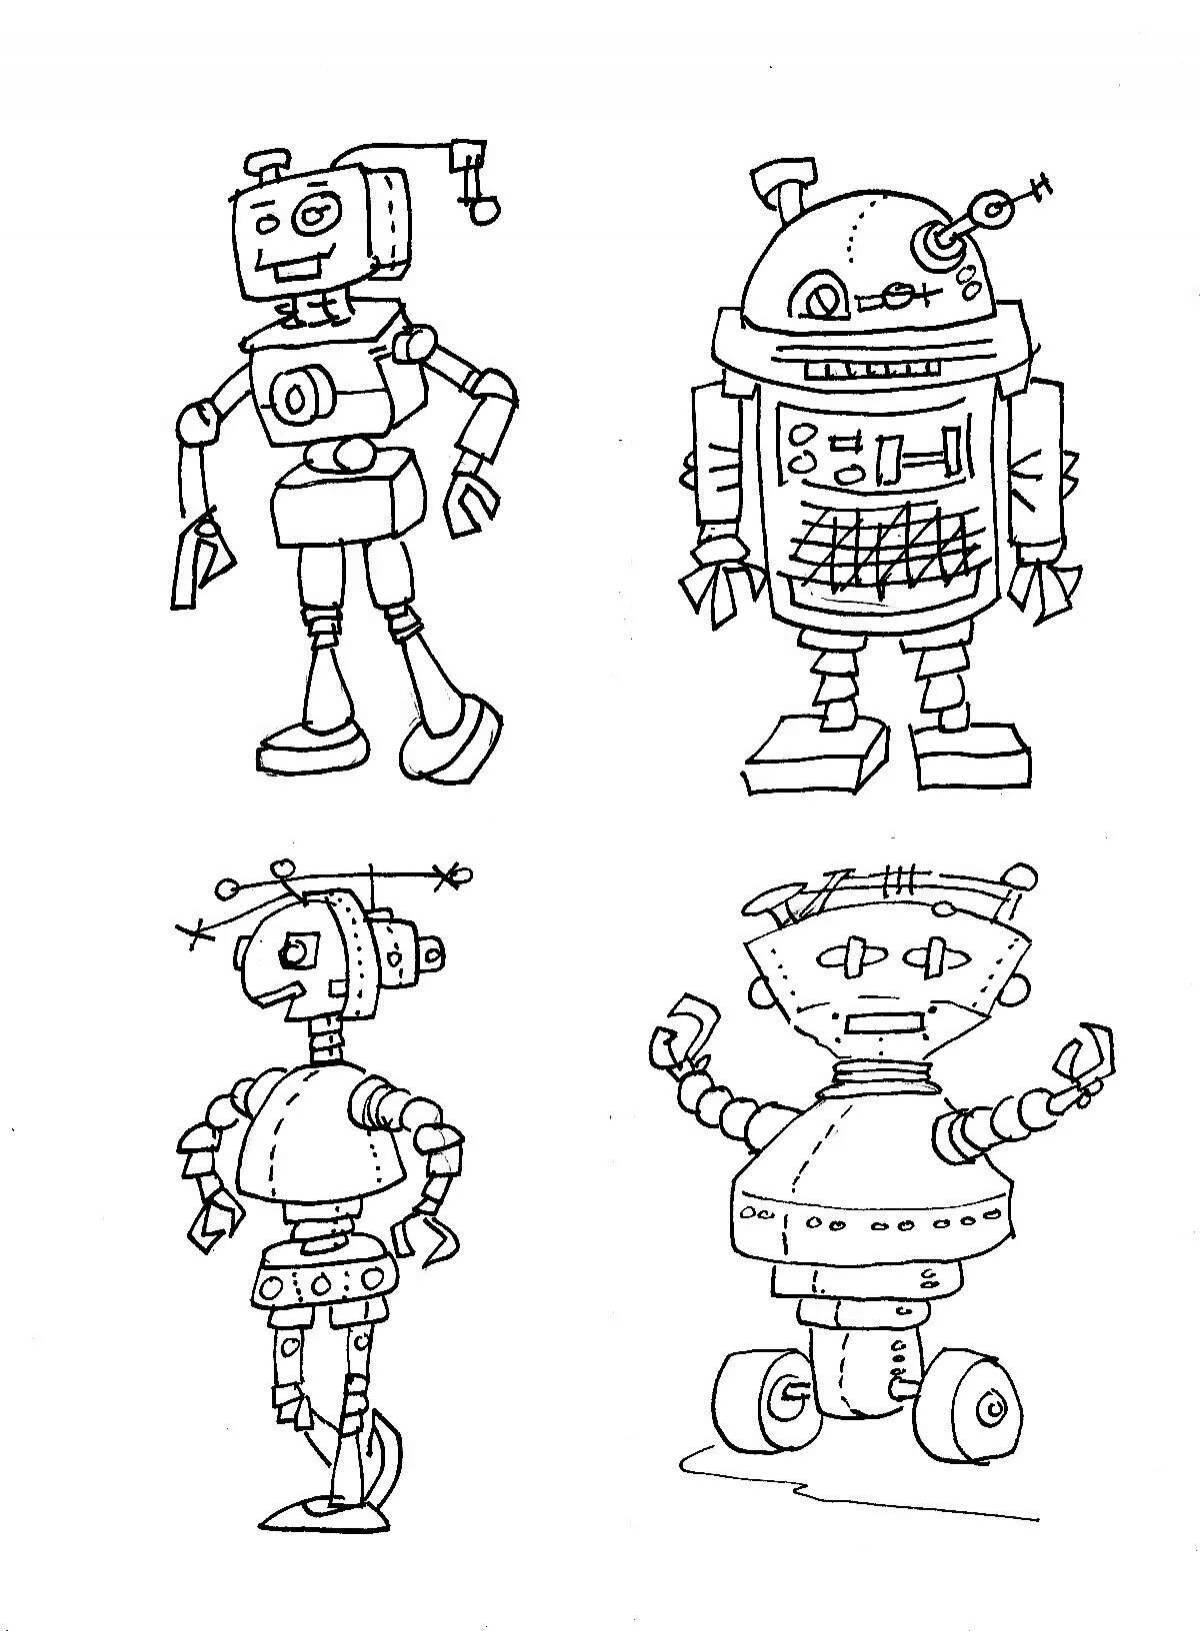 Great siren head robot coloring page